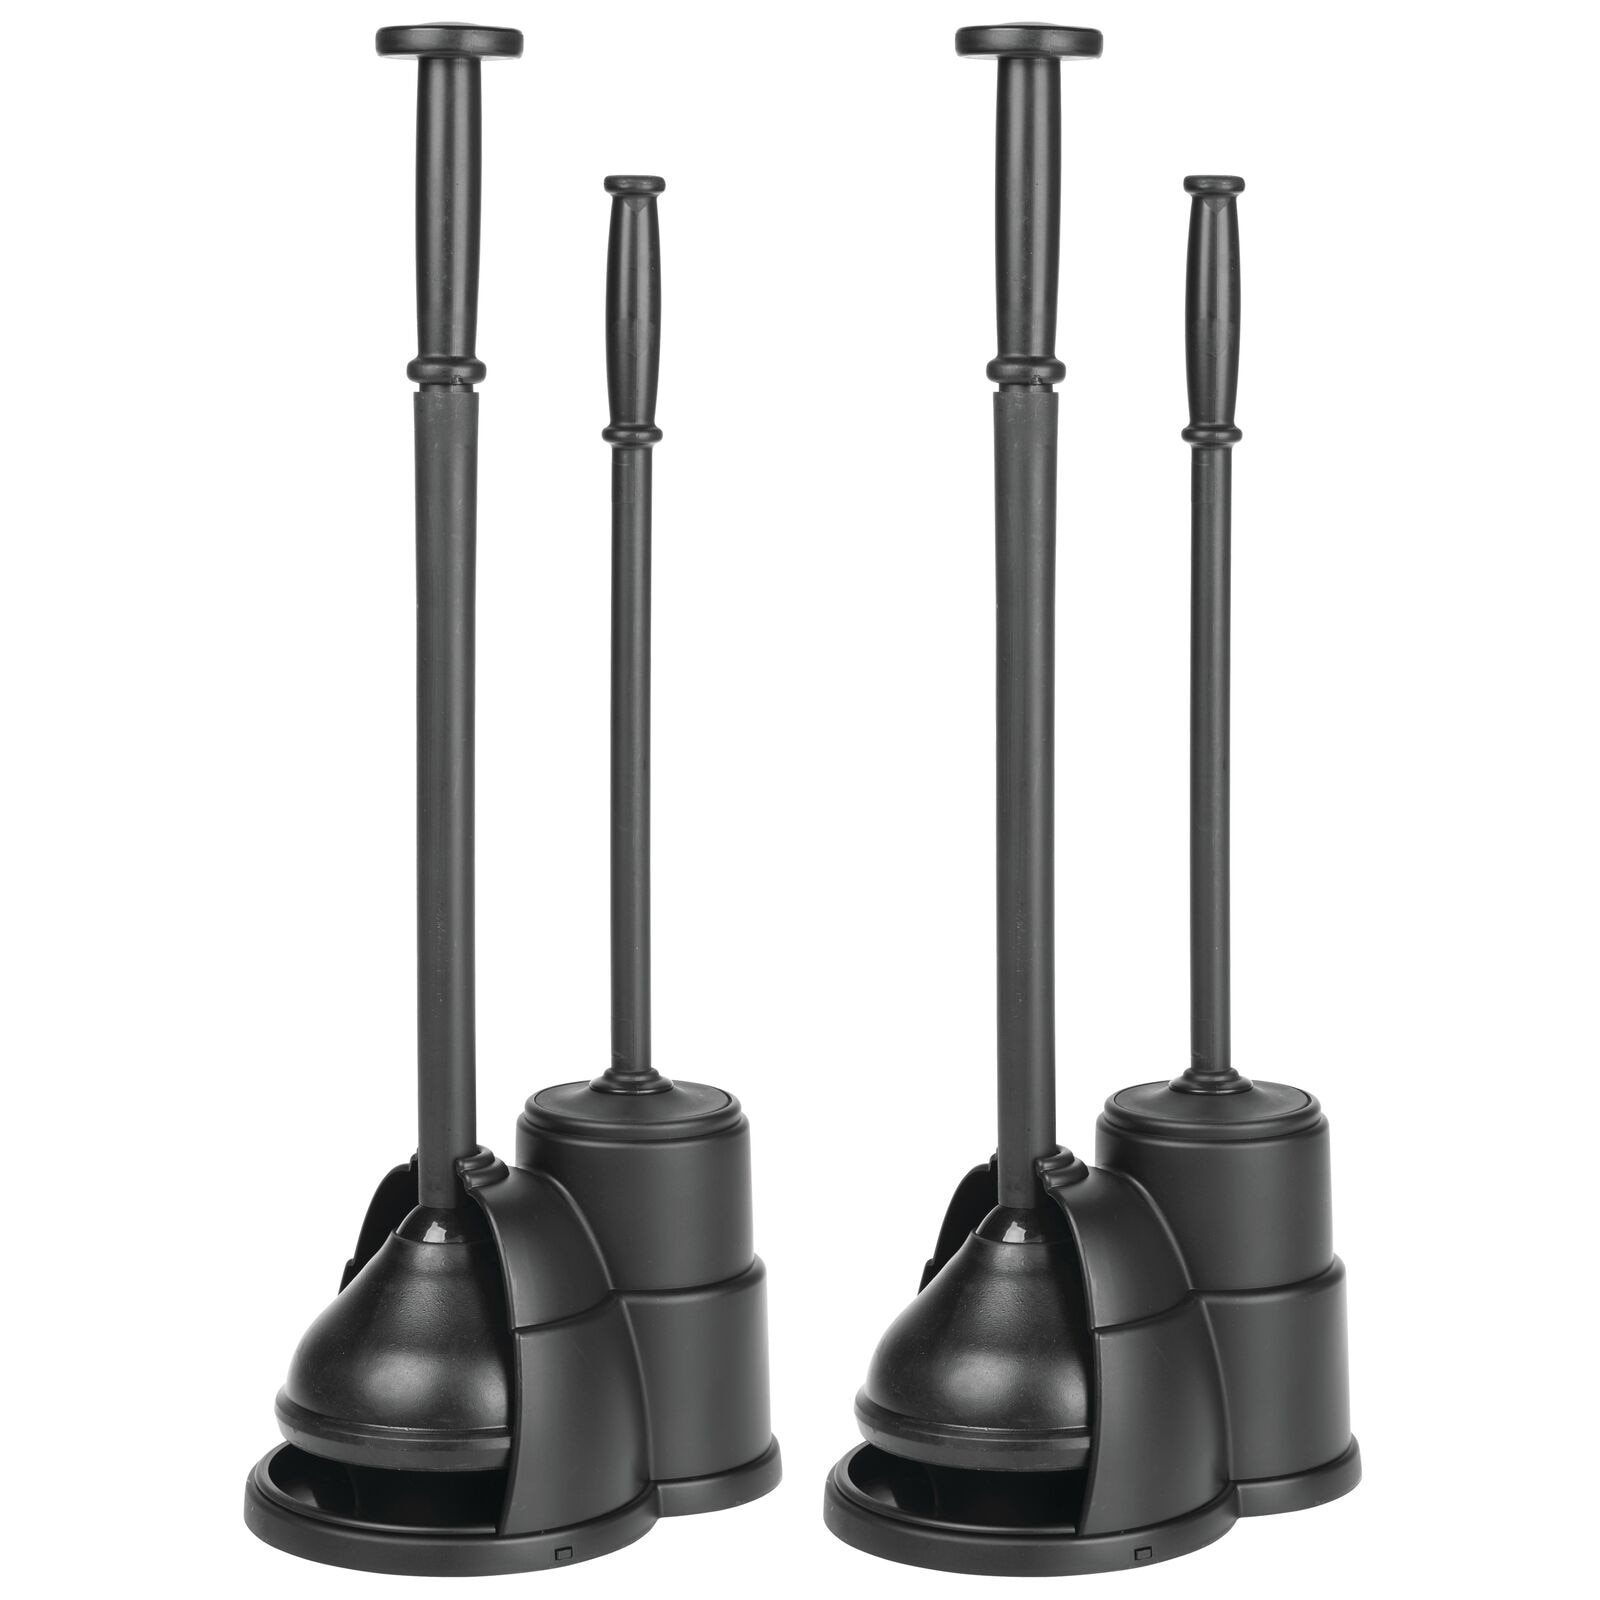 https://ak1.ostkcdn.com/images/products/is/images/direct/ca614d7acea56d9c09be0b80524d5c8b0daf21eb/mDesign-Hidden-Plunger-and-Brush-Set-for-Bathroom-Toilet---2-Pack%2C-Black.jpg